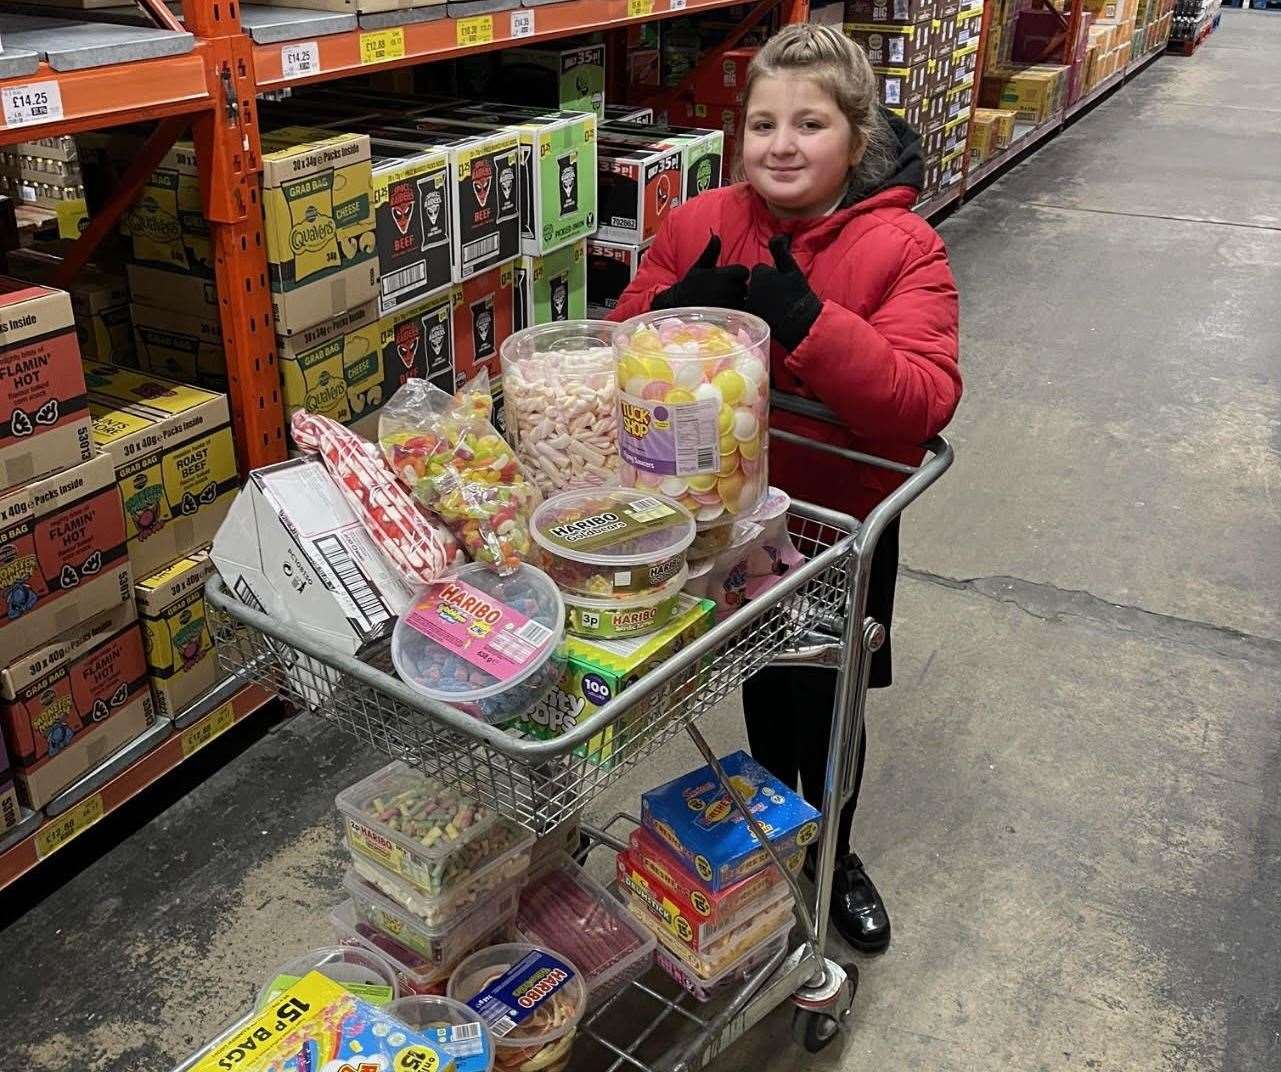 Ellie Mae Middleton buying supplies for her sweet shop at Buckley's indoor market in Sittingbourne